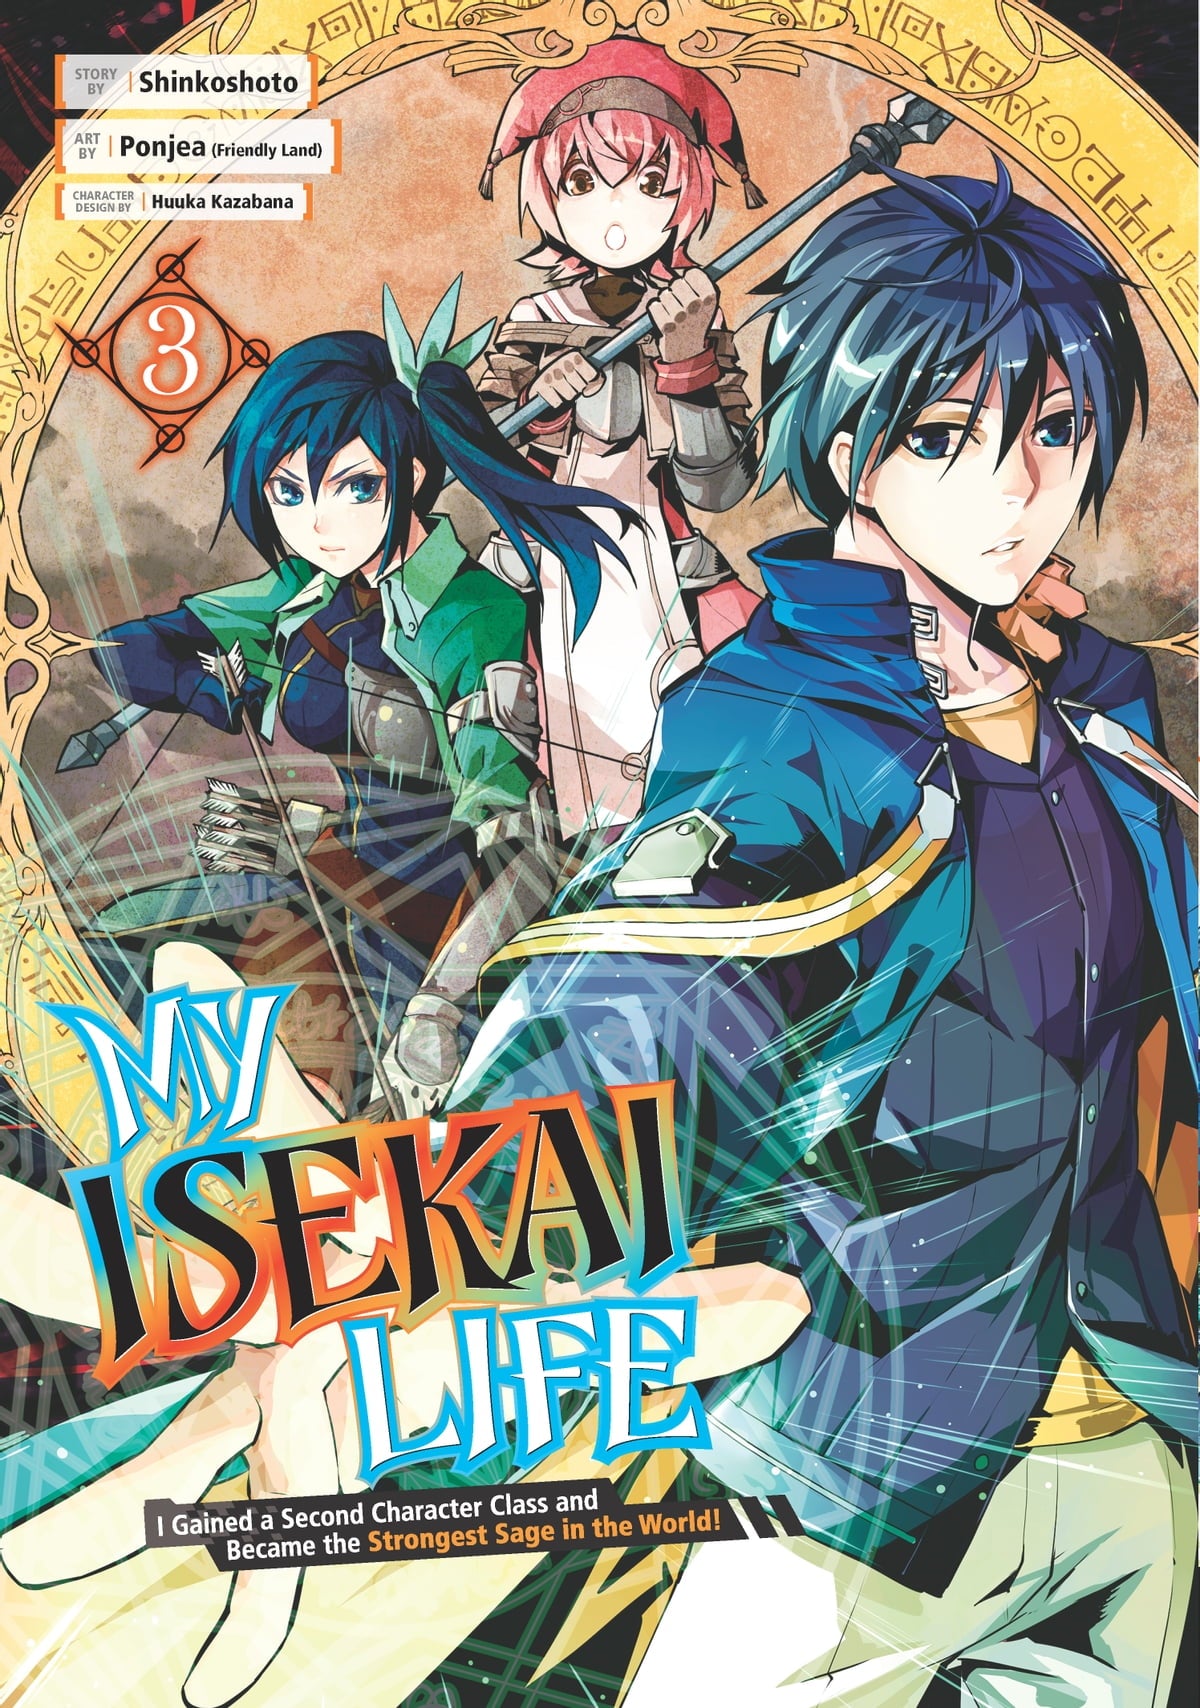 My Isekai Life: I Gained a Second Character Class and Became the Strongest Sage in the World! Vol. 03